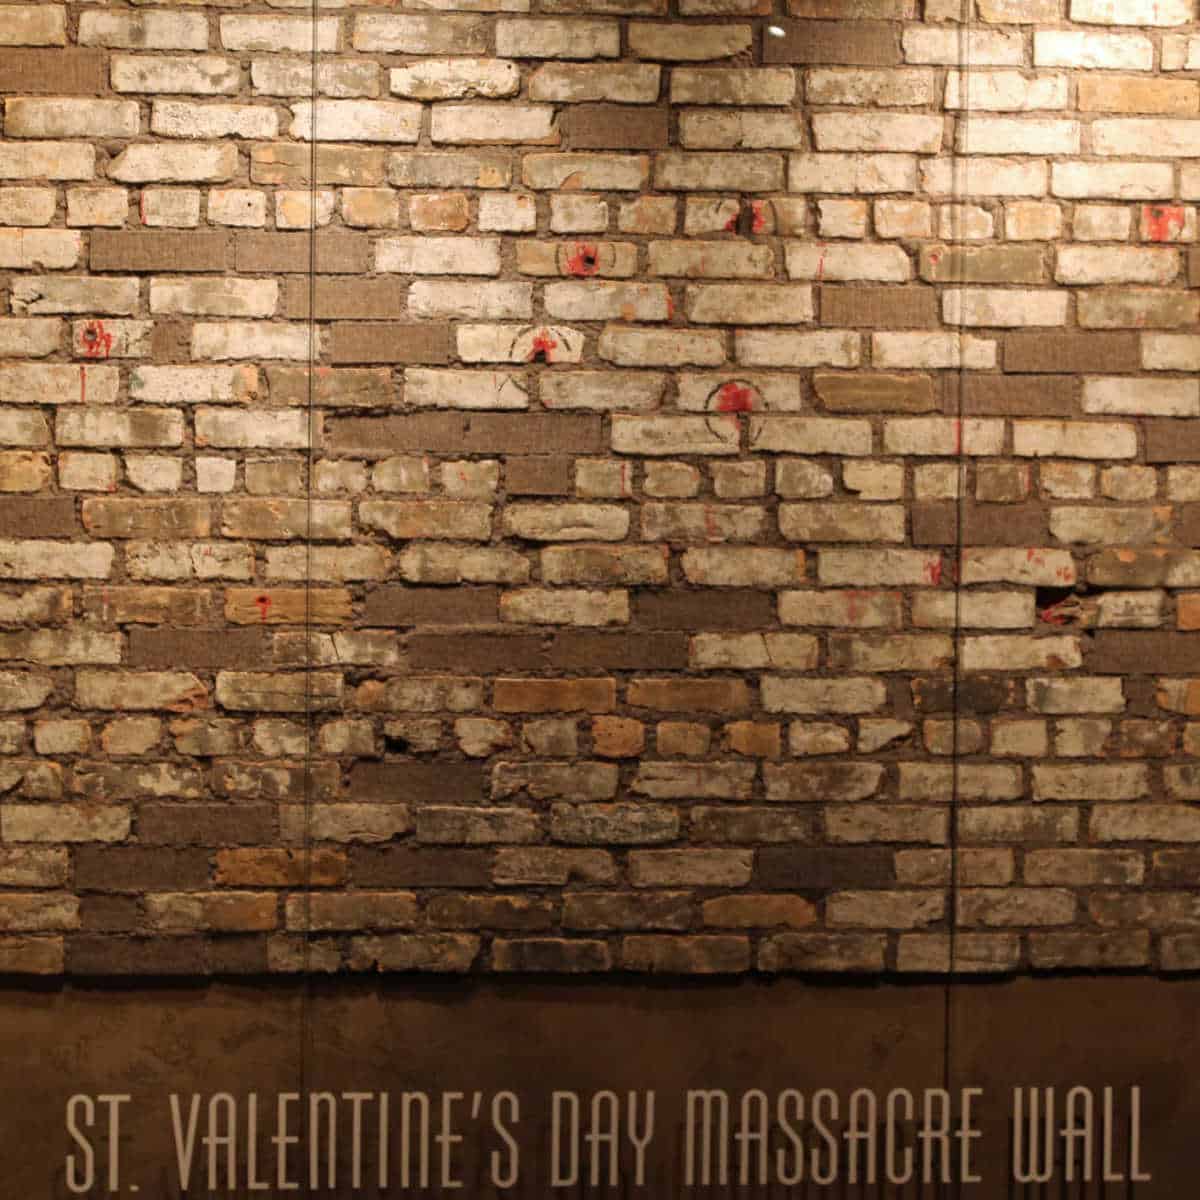 St. Valentine's Day Massacre Wall with marks on it in the Mob Museum